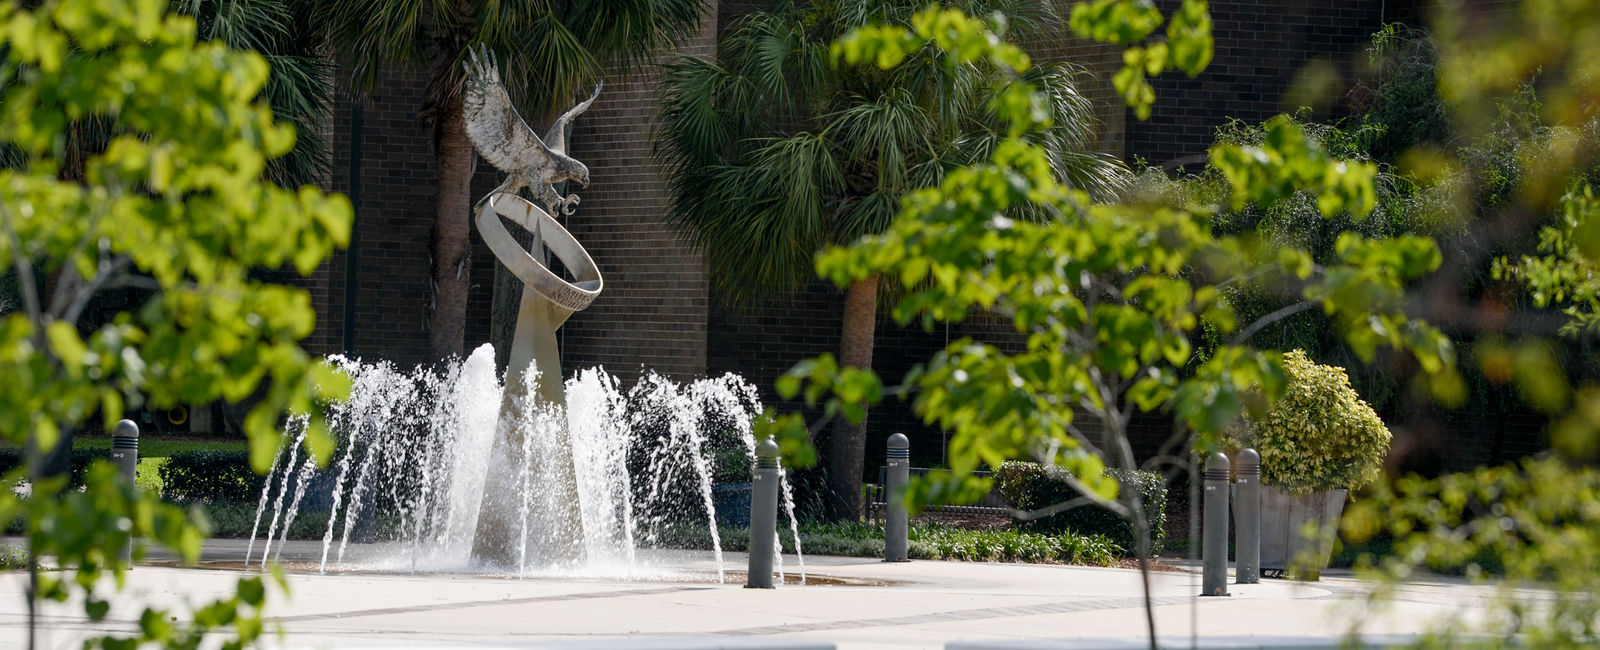 UNF osprey fountain on campus surrounded by greenery and lots of palm trees